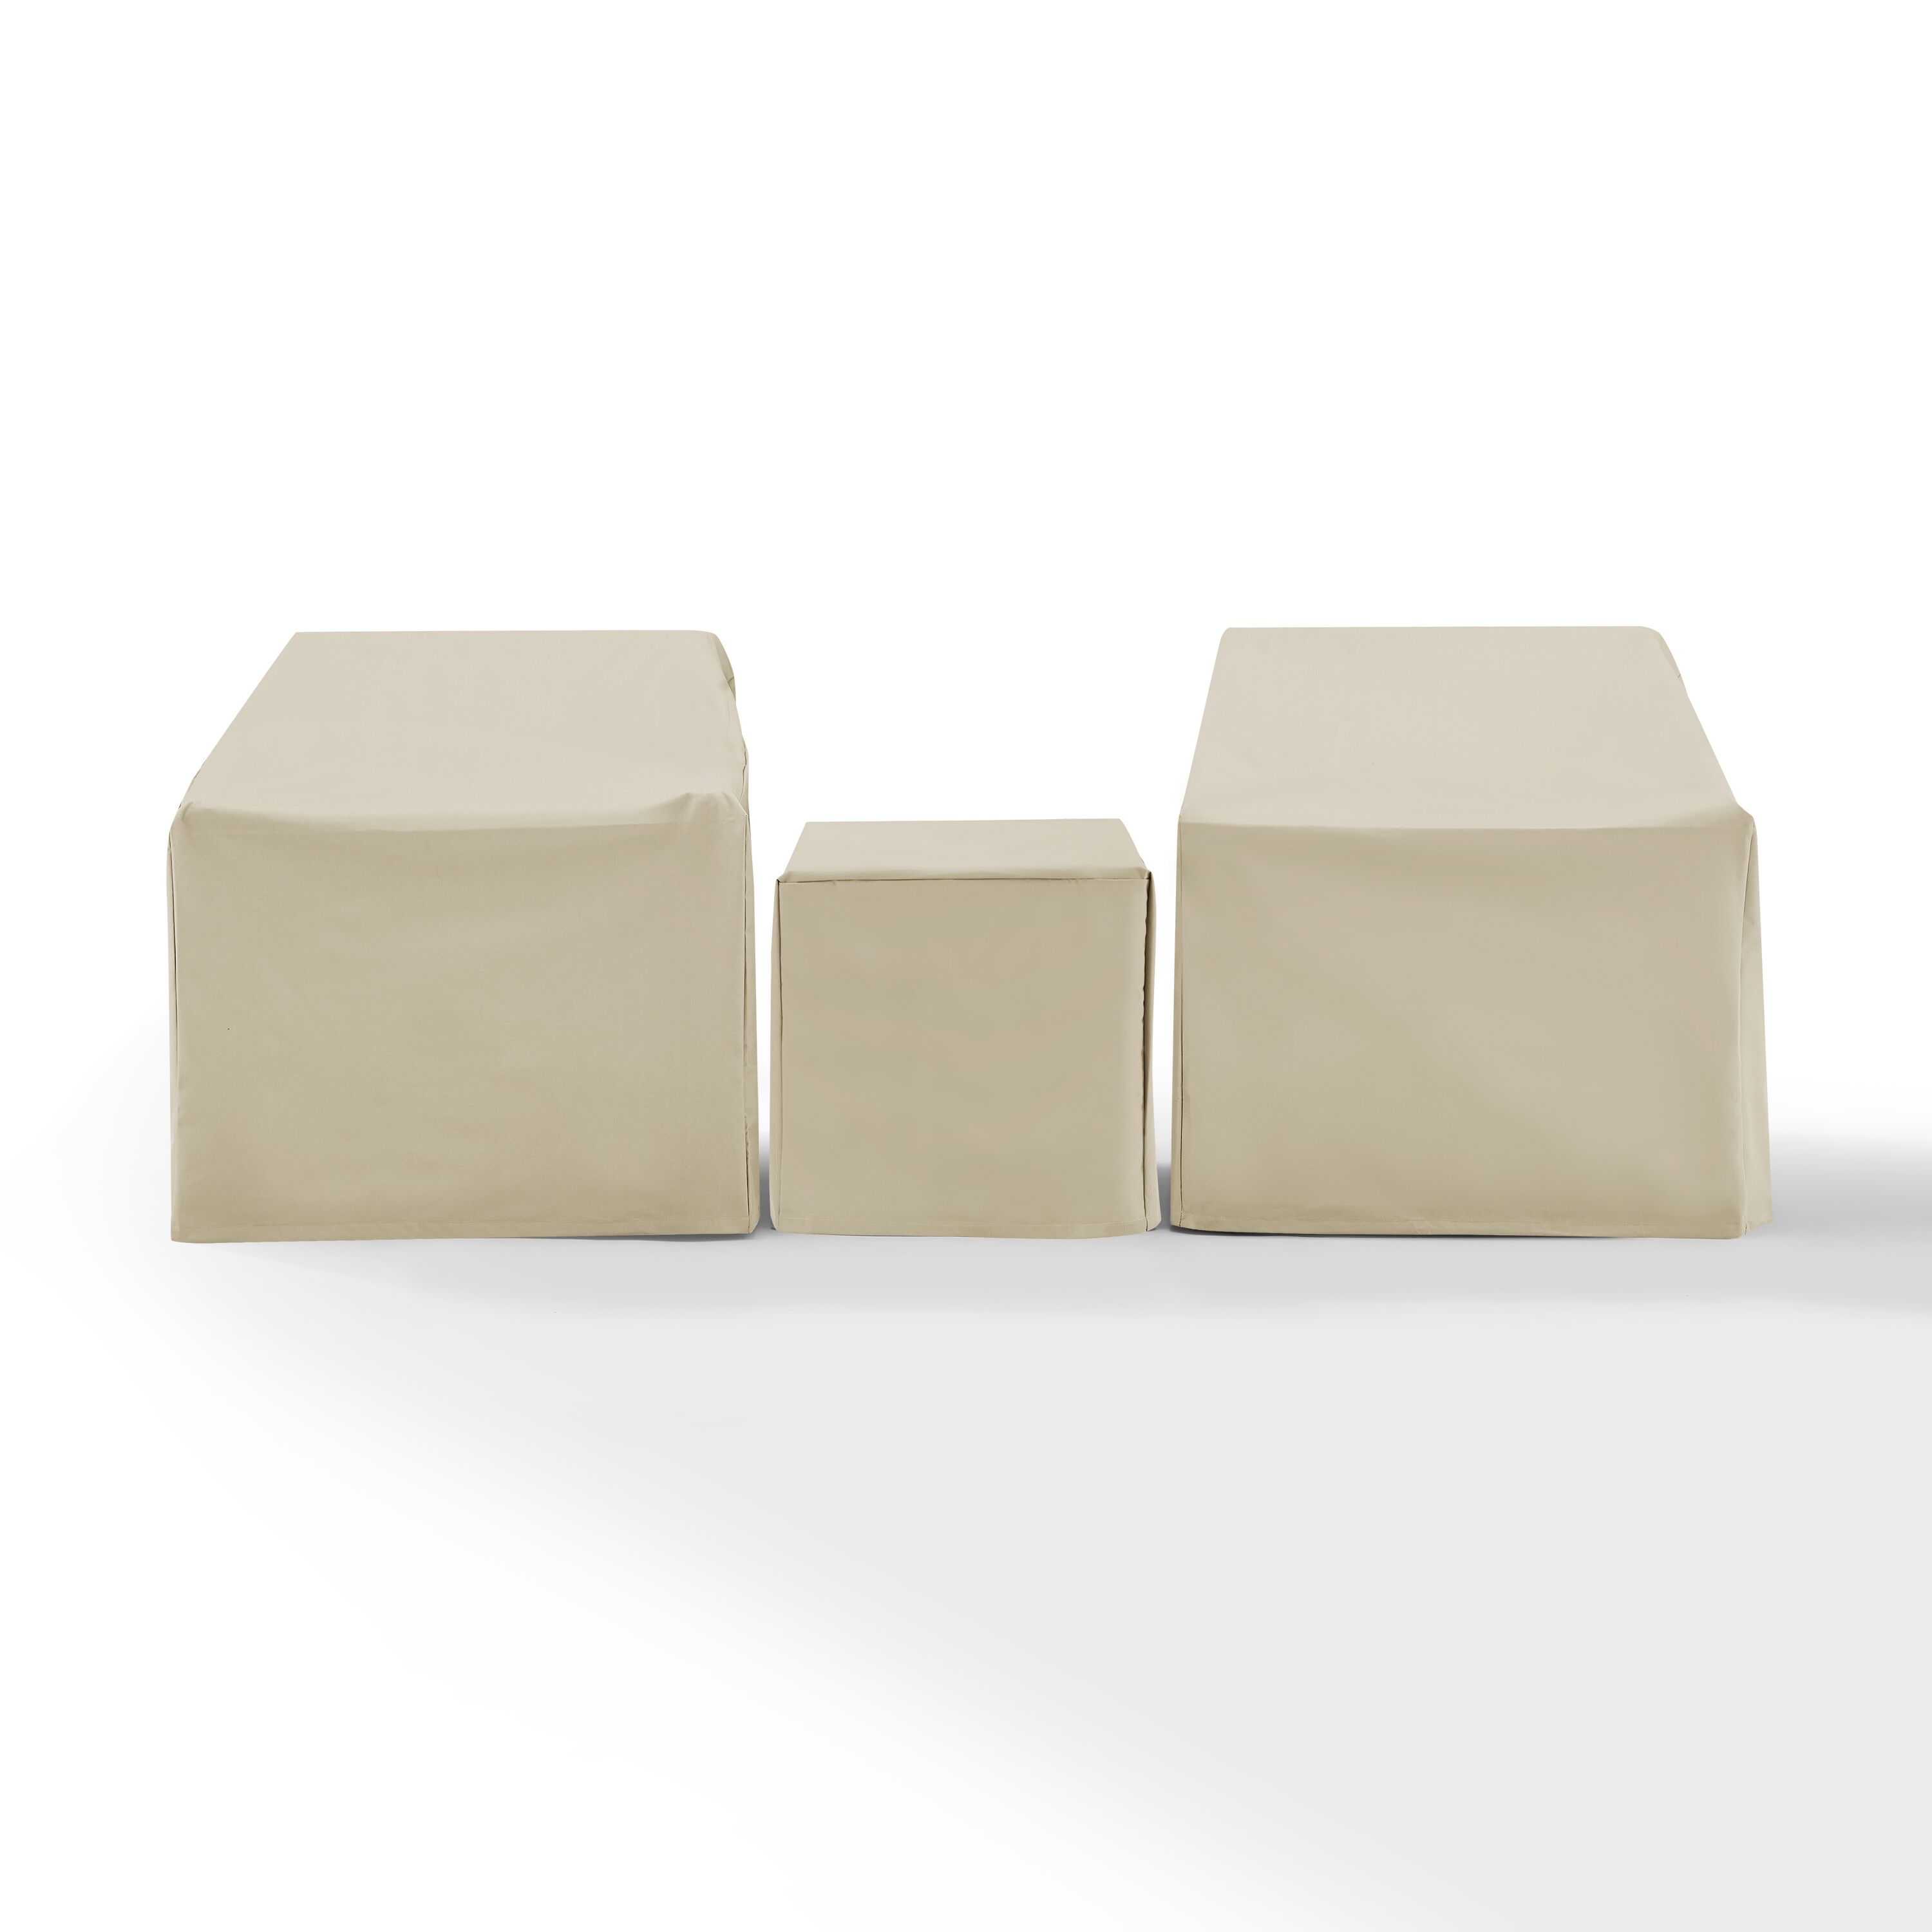 3Pc Furniture Cover Set - image 1 of 7